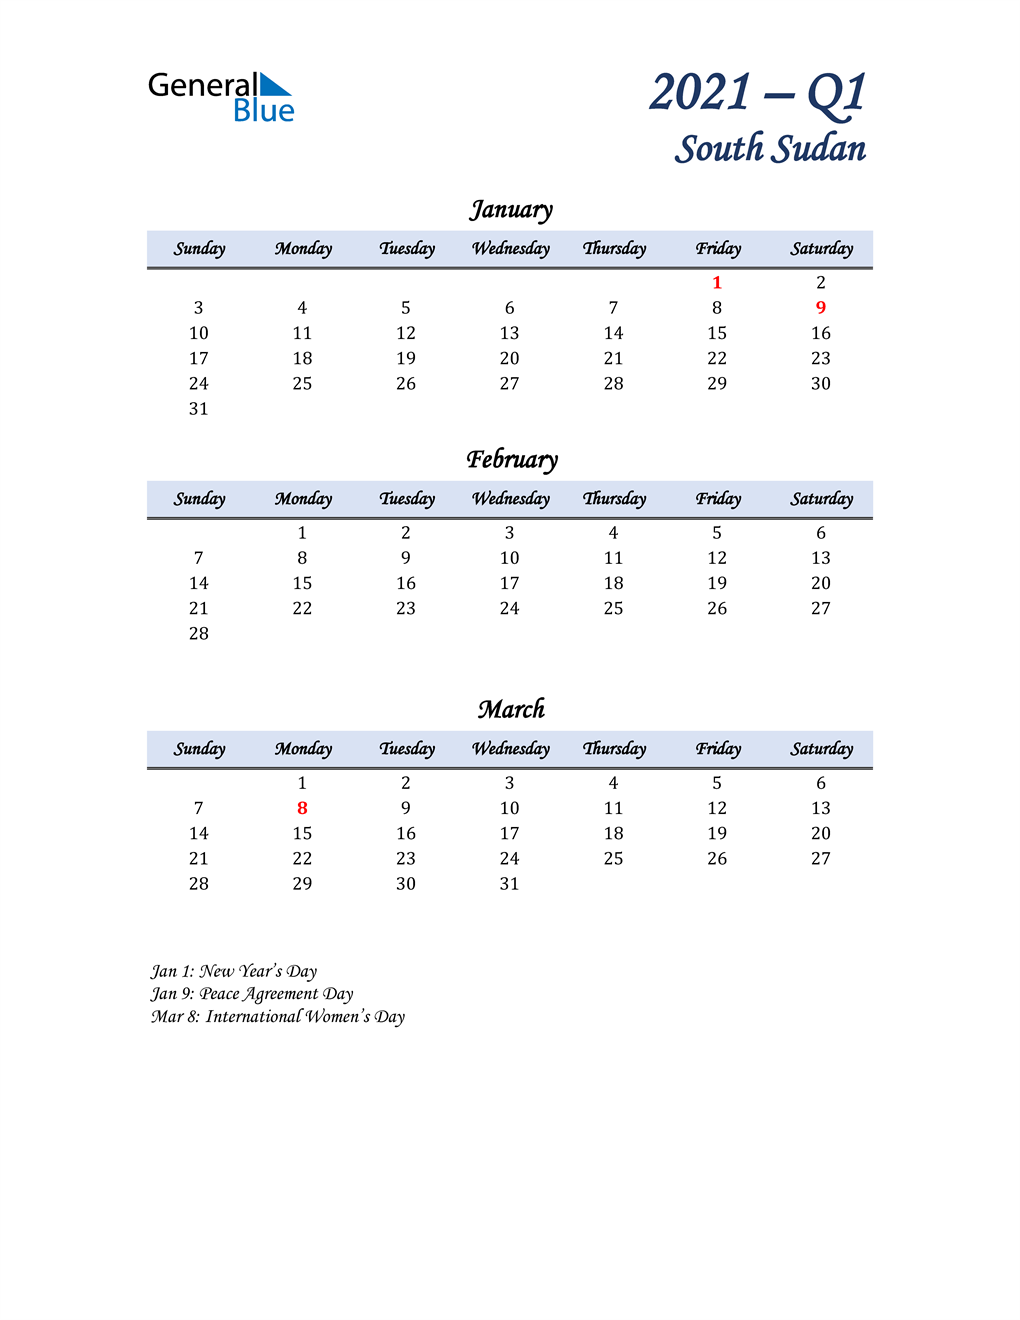  January, February, and March Calendar for South Sudan